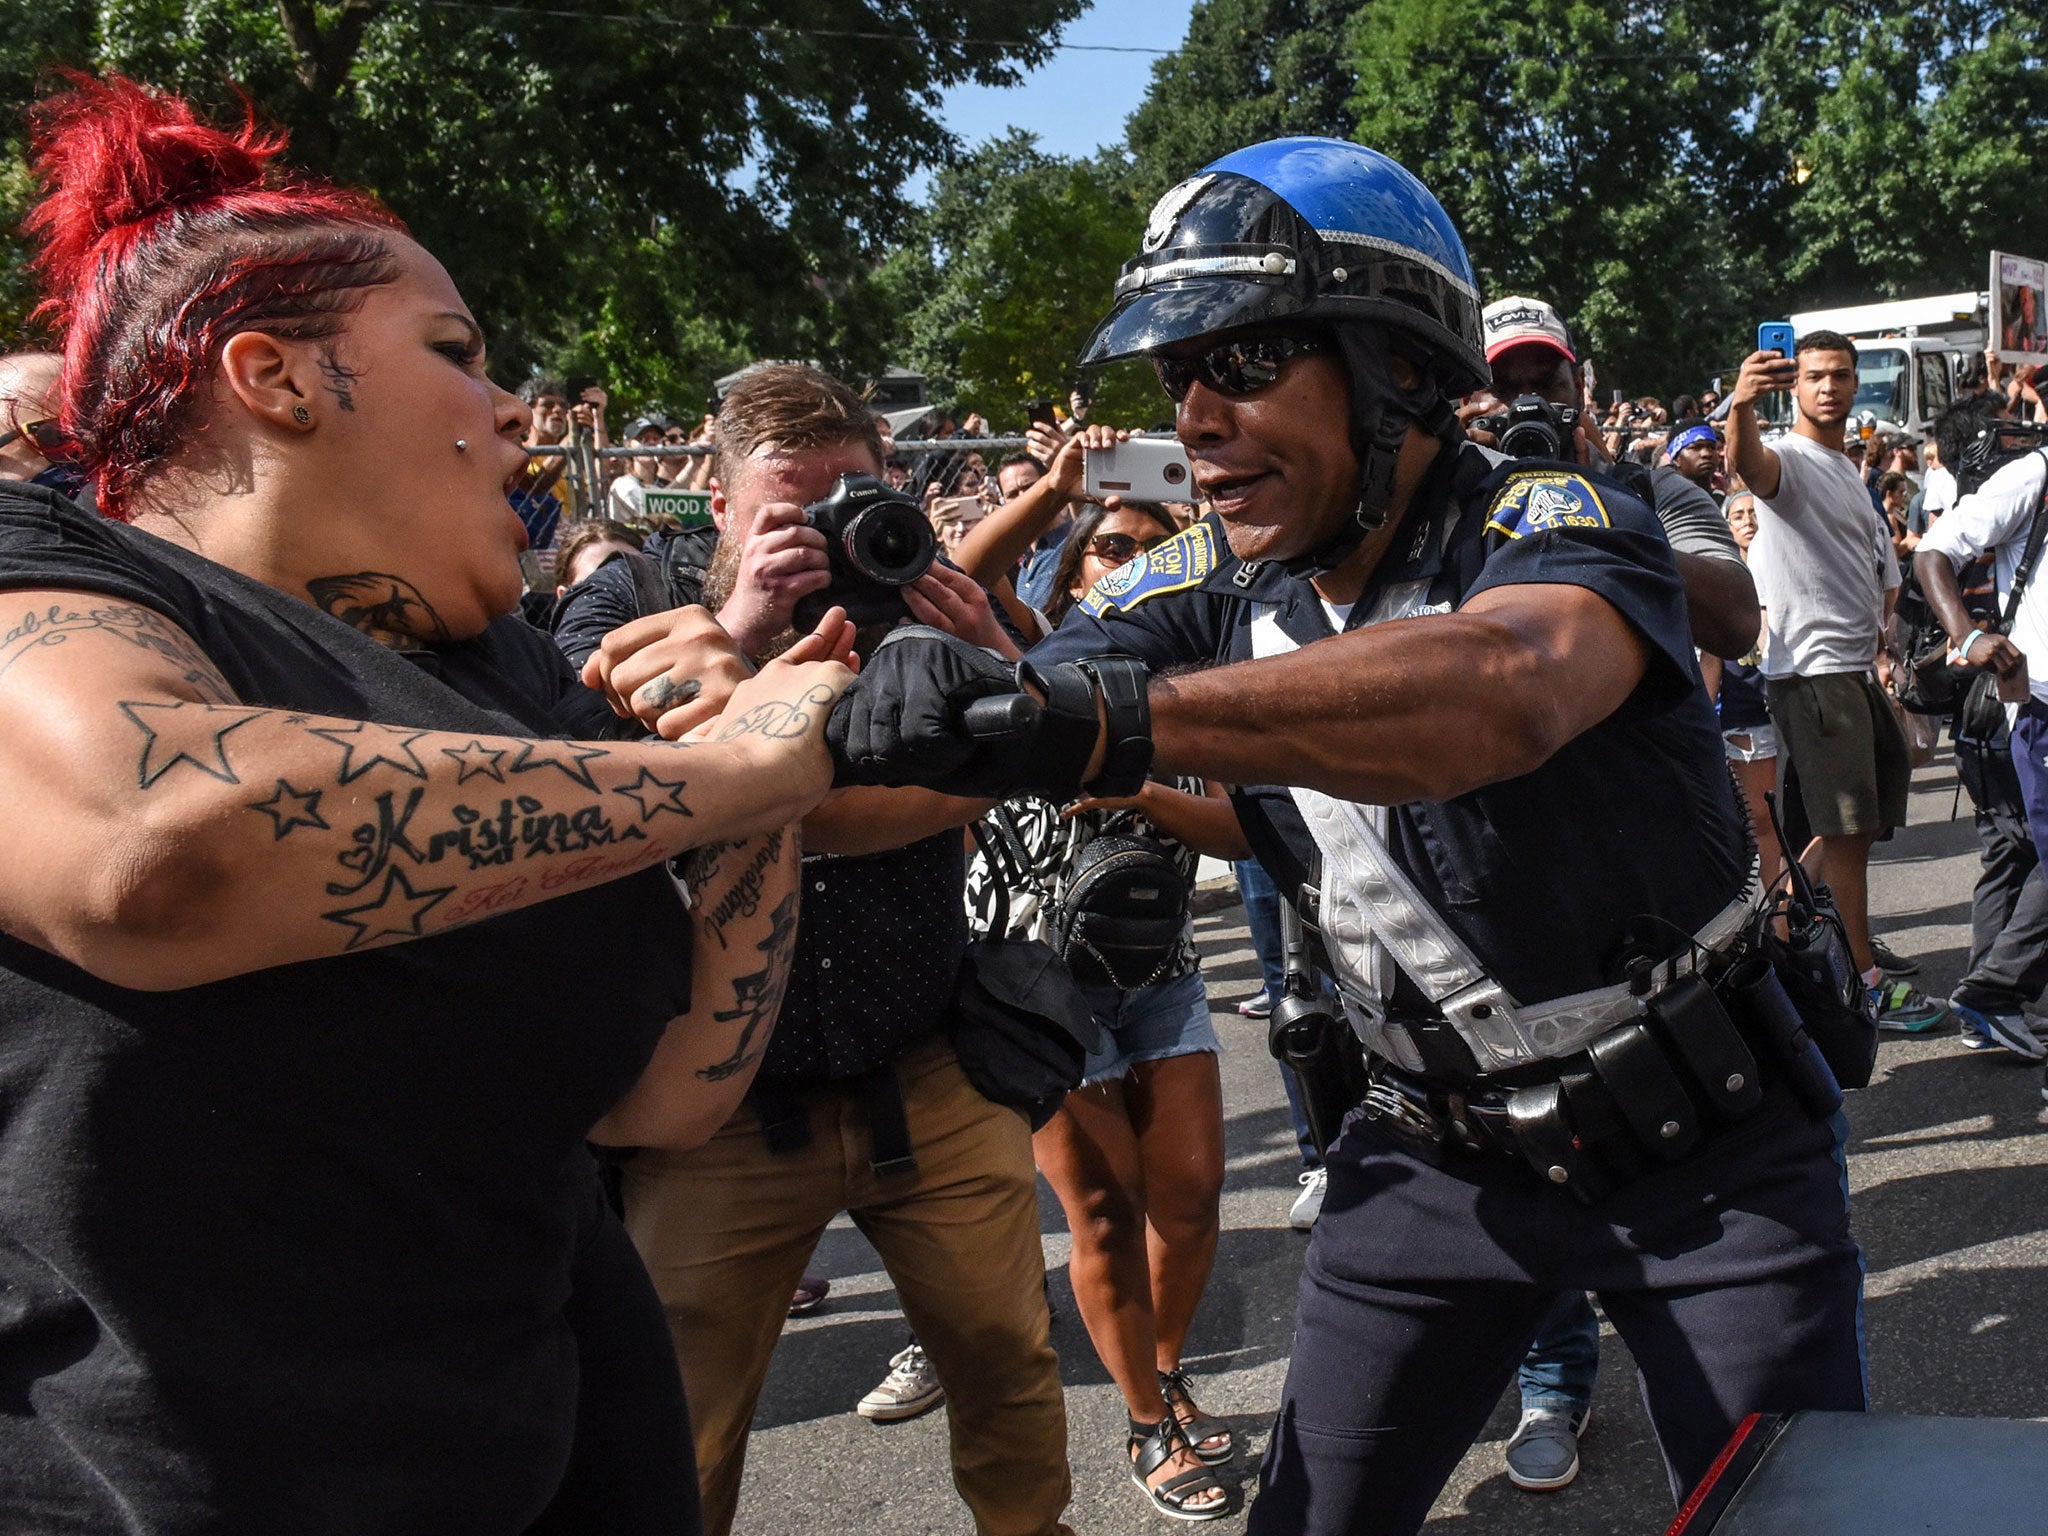 &#13;
Counter-protesters clash with Boston Police outside of the Boston Commons and the Boston Free Speech Rally in Boston, Massachusetts, U.S., August 19, 2017 &#13;